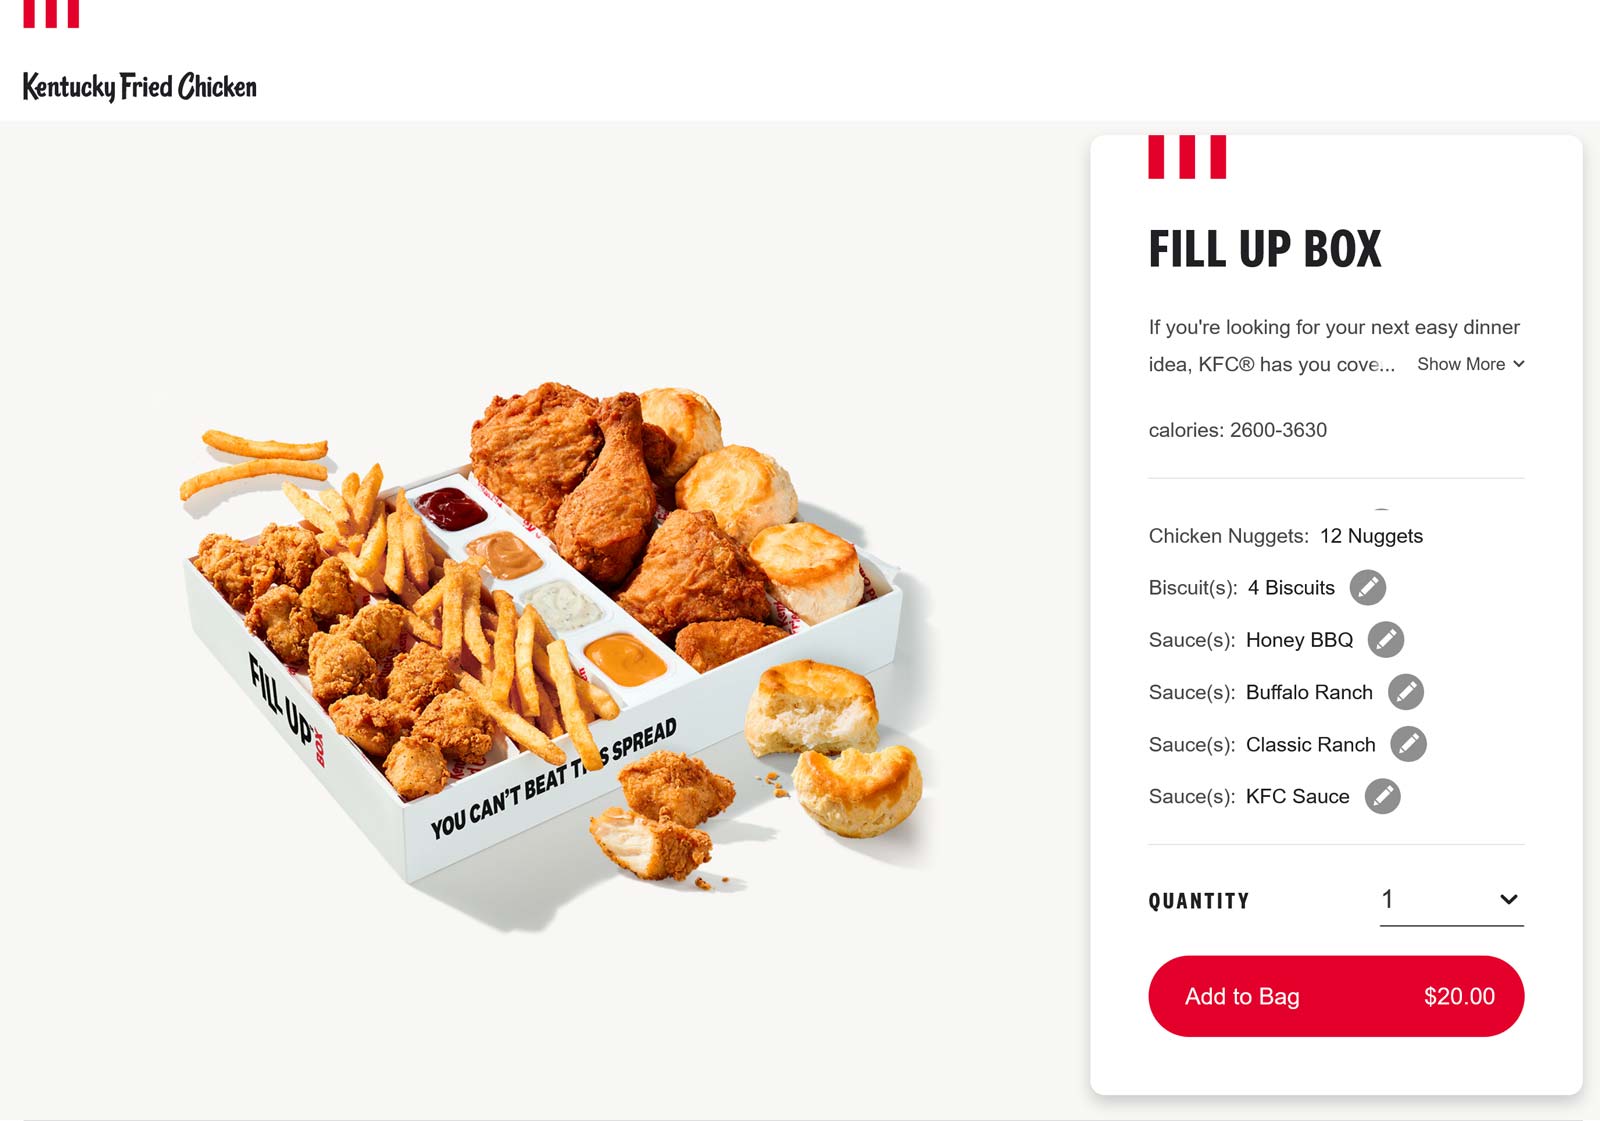 KFC restaurants Coupon  4pc chicken + 12 nuggets + fries + 4 biscuits = $20 fill up box at KFC #kfc 